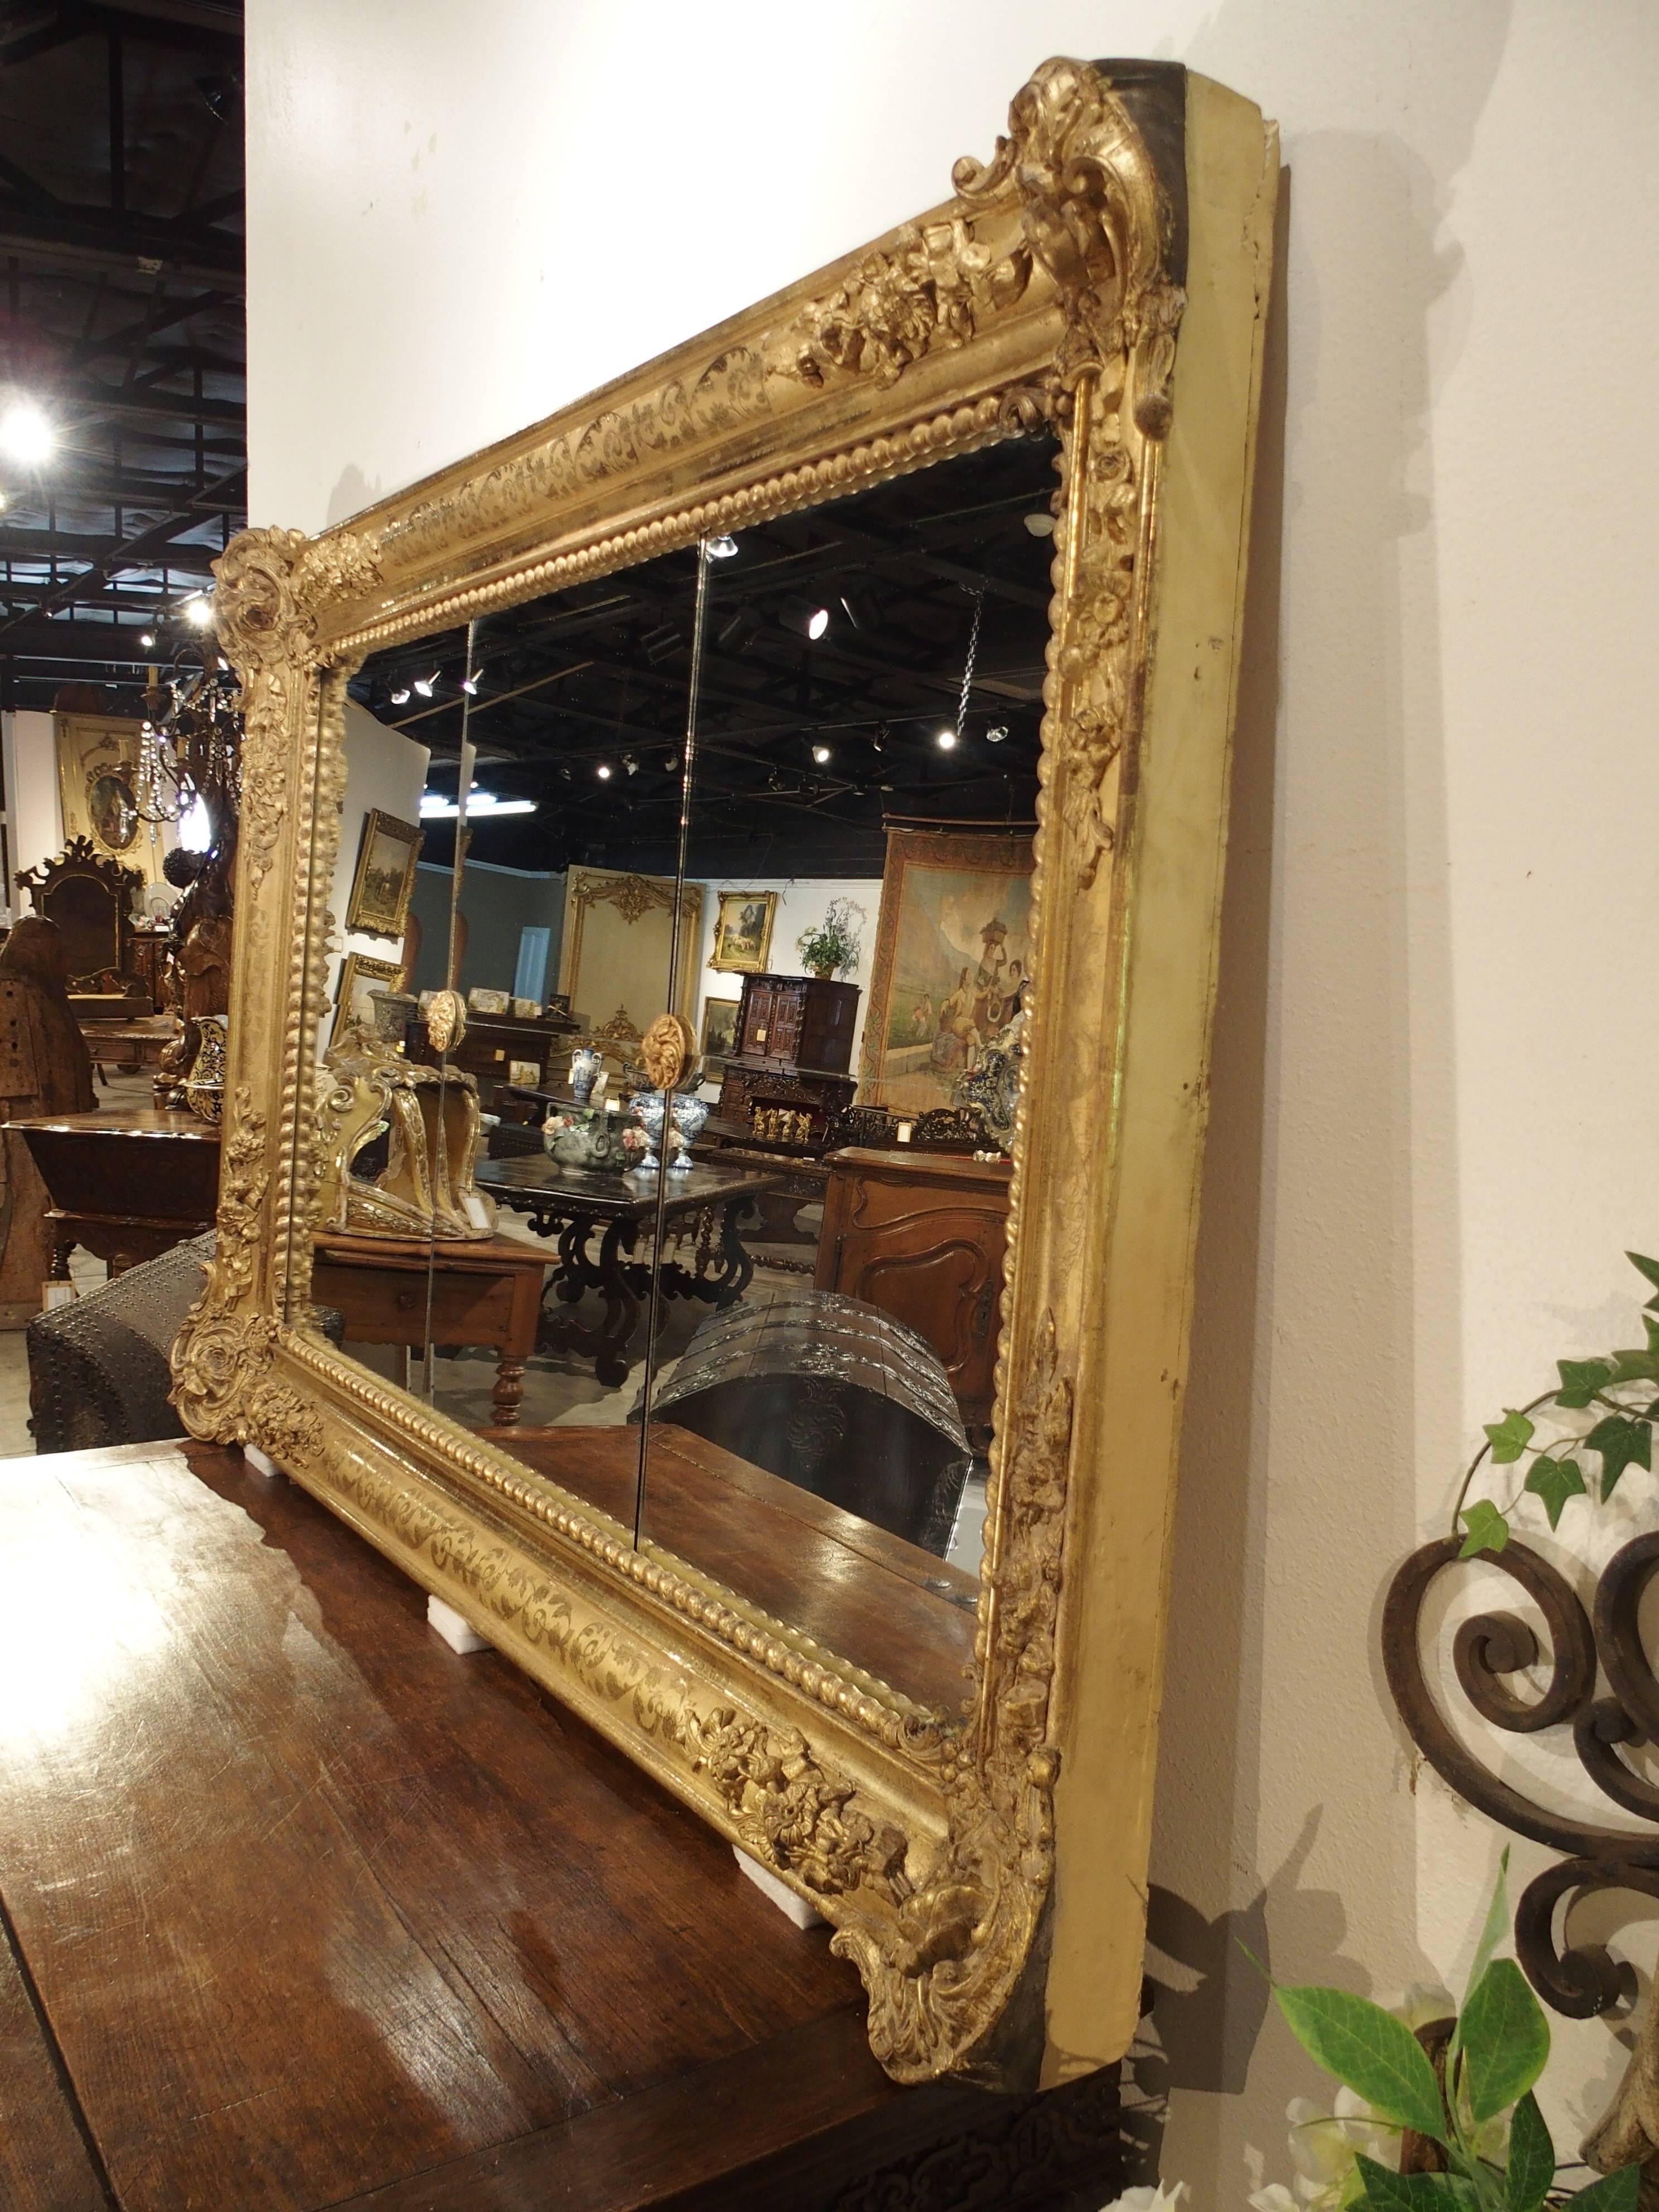 This elegant antique French, giltwood, rectangular mirror has absolutely stunning ornamentation. At the corners are motifs of roses with trailing vines, various flowers and ribbons to either side. On the mouldings are incised, scrolling floral and